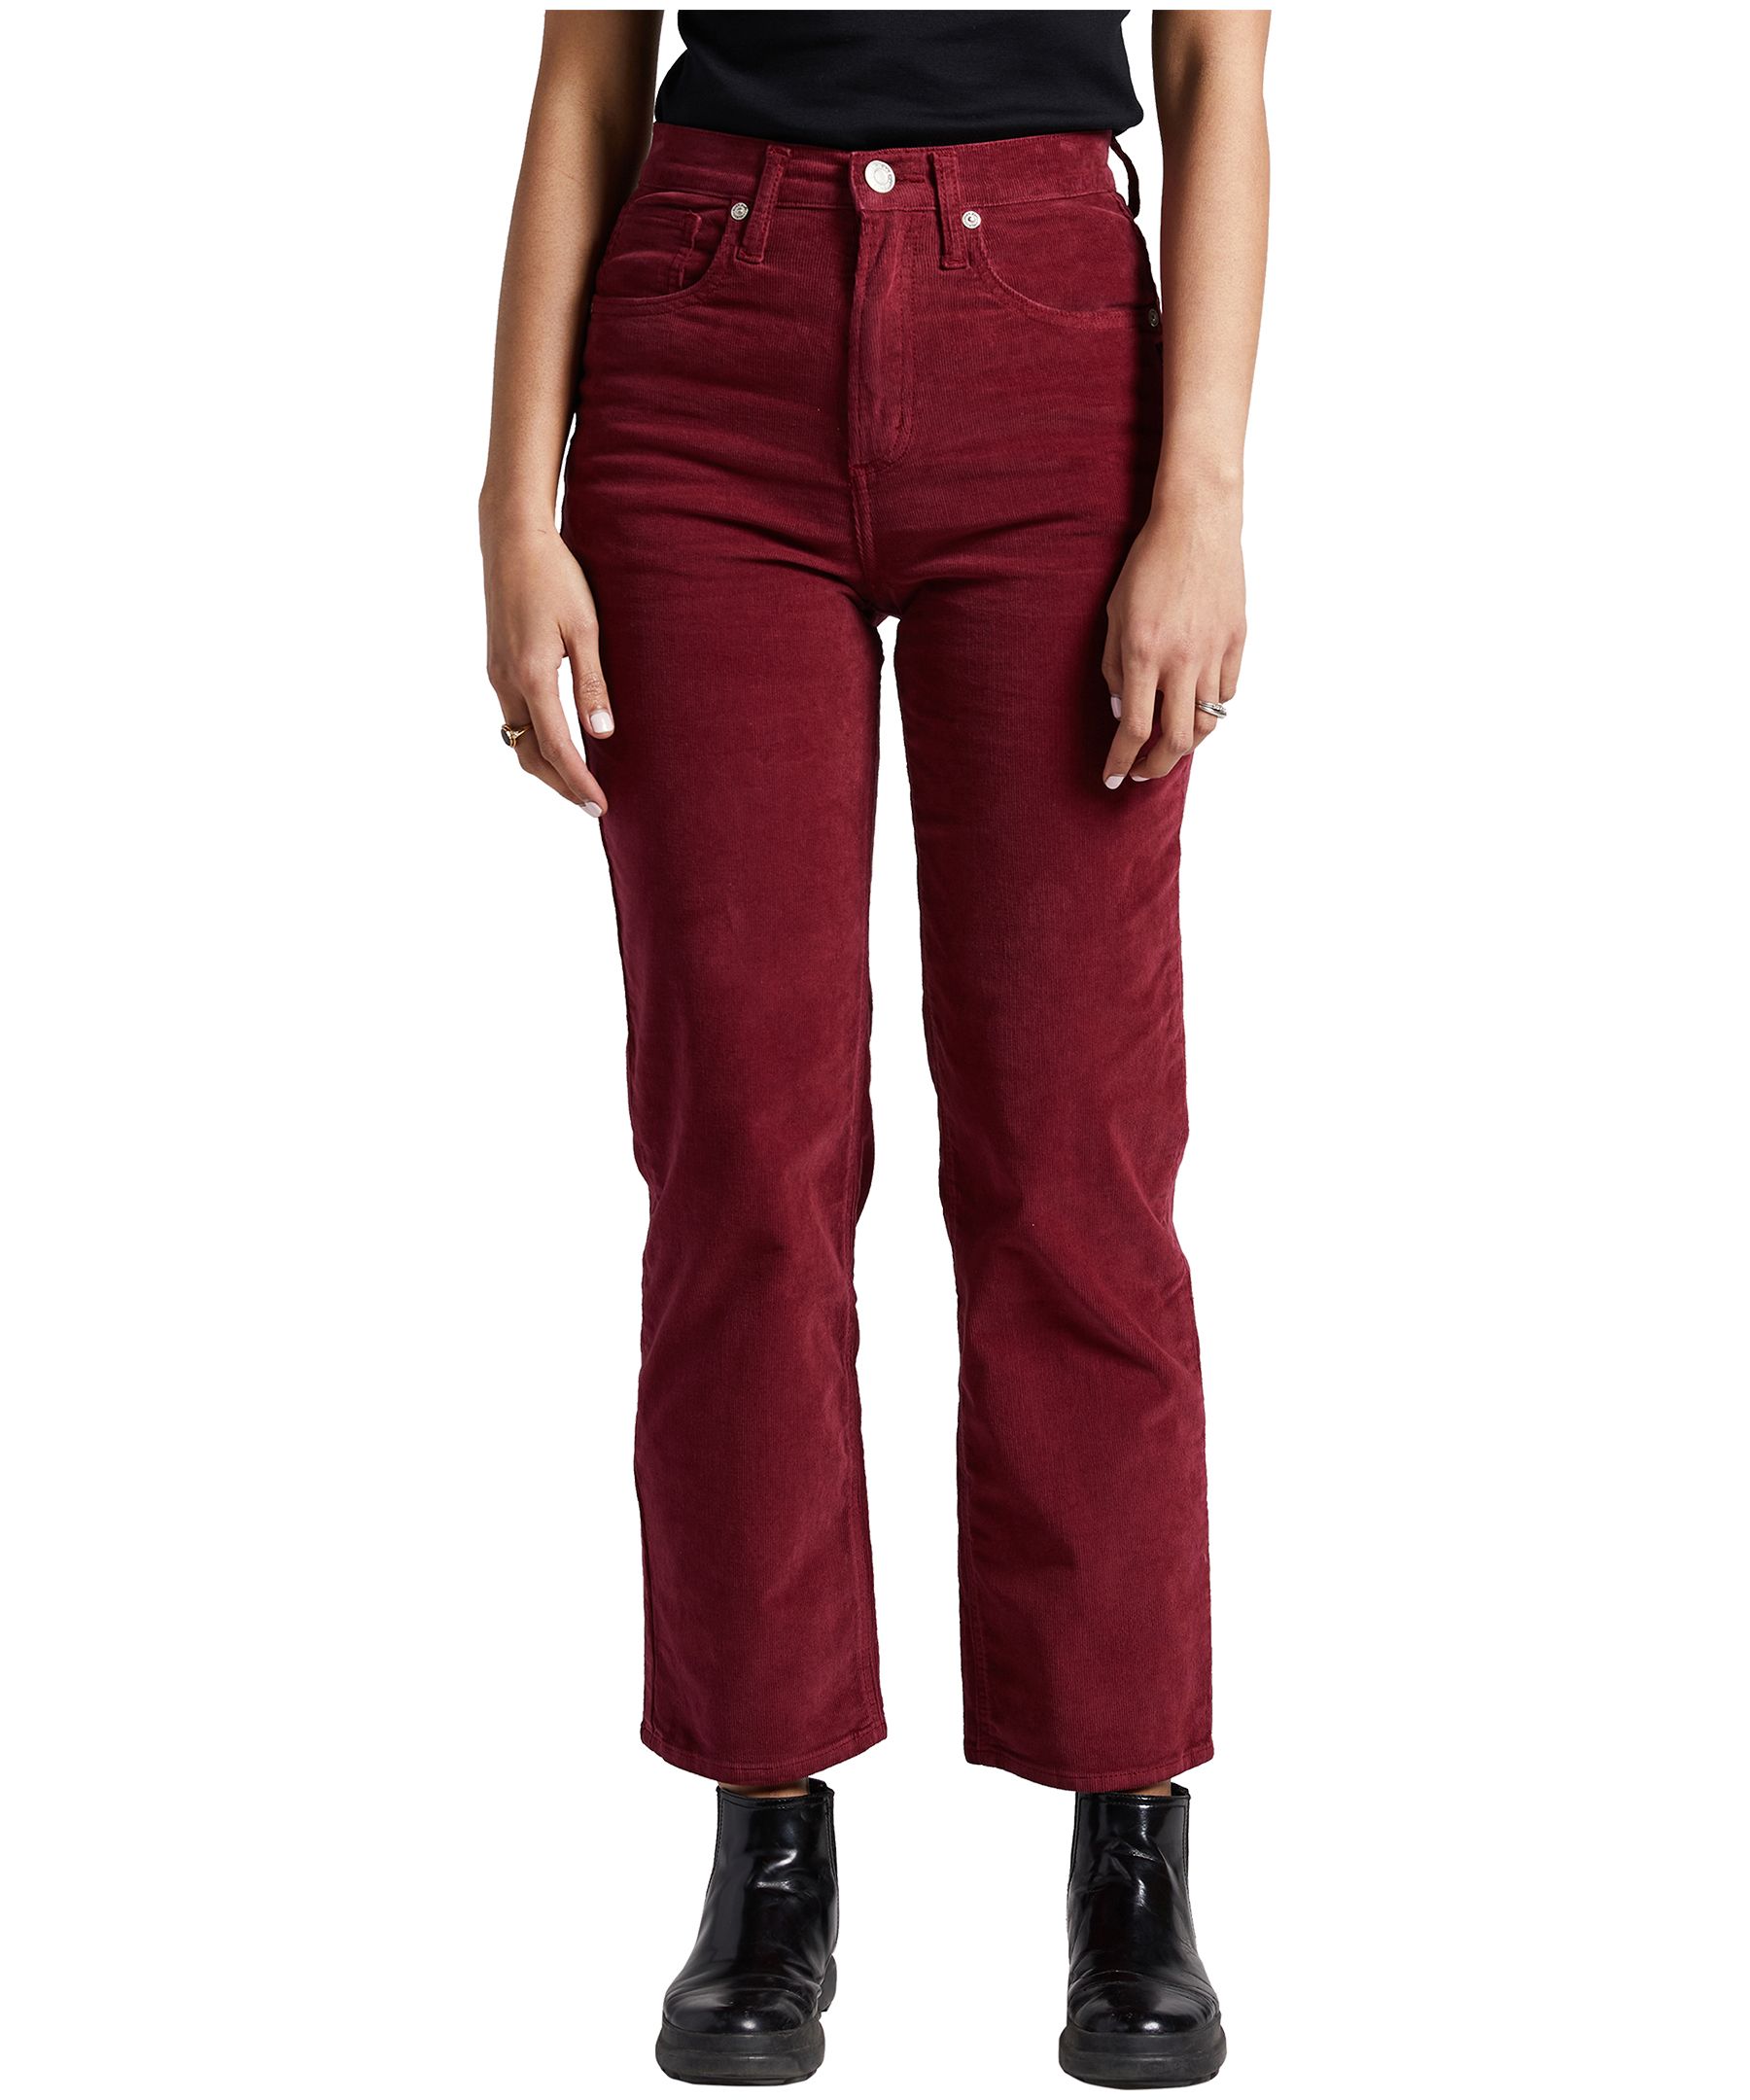 https://media-www.marks.com/product/marks-work-wearhouse/ladies-world/ladies-denim/410037071919/silver-women-s-highly-desirable-ultra-high-rise-slim-fit-corduroy-pants-7328c74a-374a-478e-b23c-e75278897086-jpgrendition.jpg